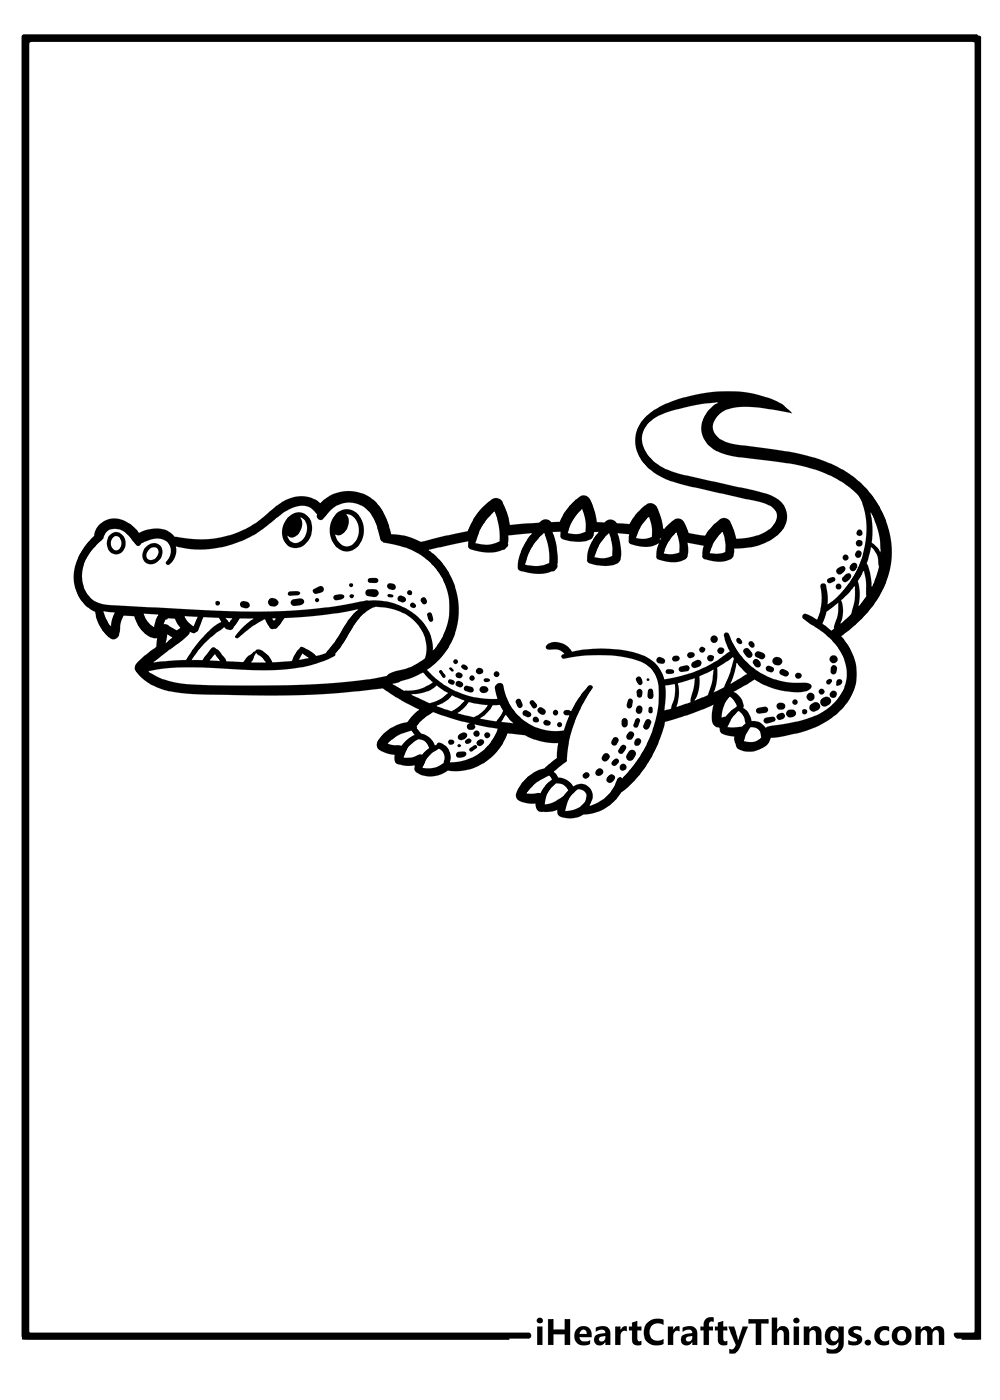 Crocodile Coloring Pages free pdf download